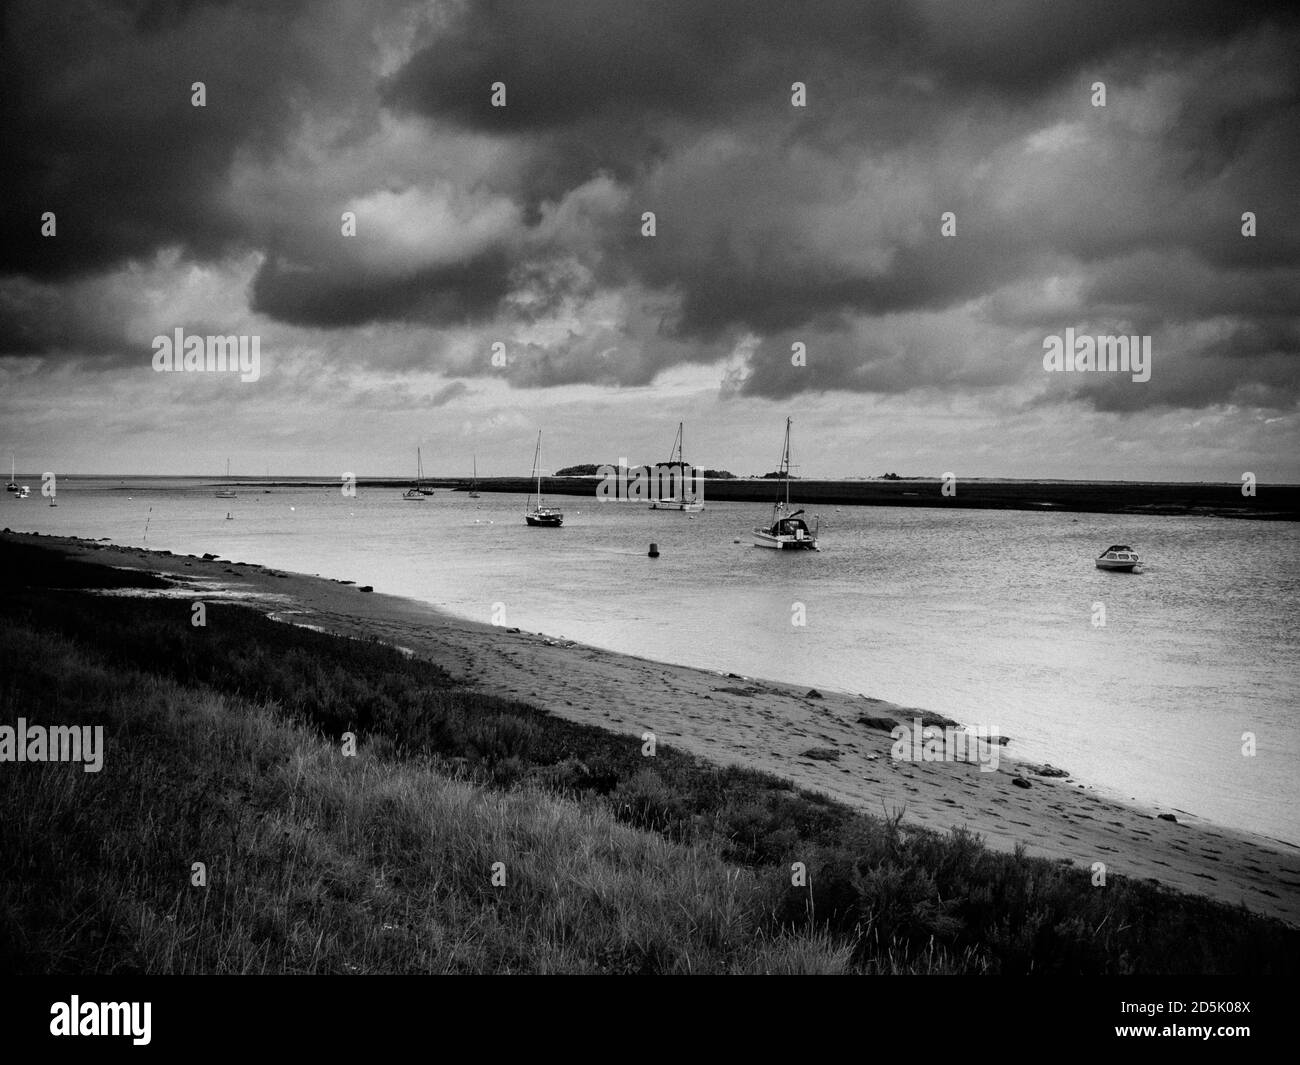 A dull day in Norfolk. A monochrome image of stormy weather (Nimbostratus clouds) looking out to The Big Gap at Wells-Next-The-Sea, Norfolk, UK. Stock Photo